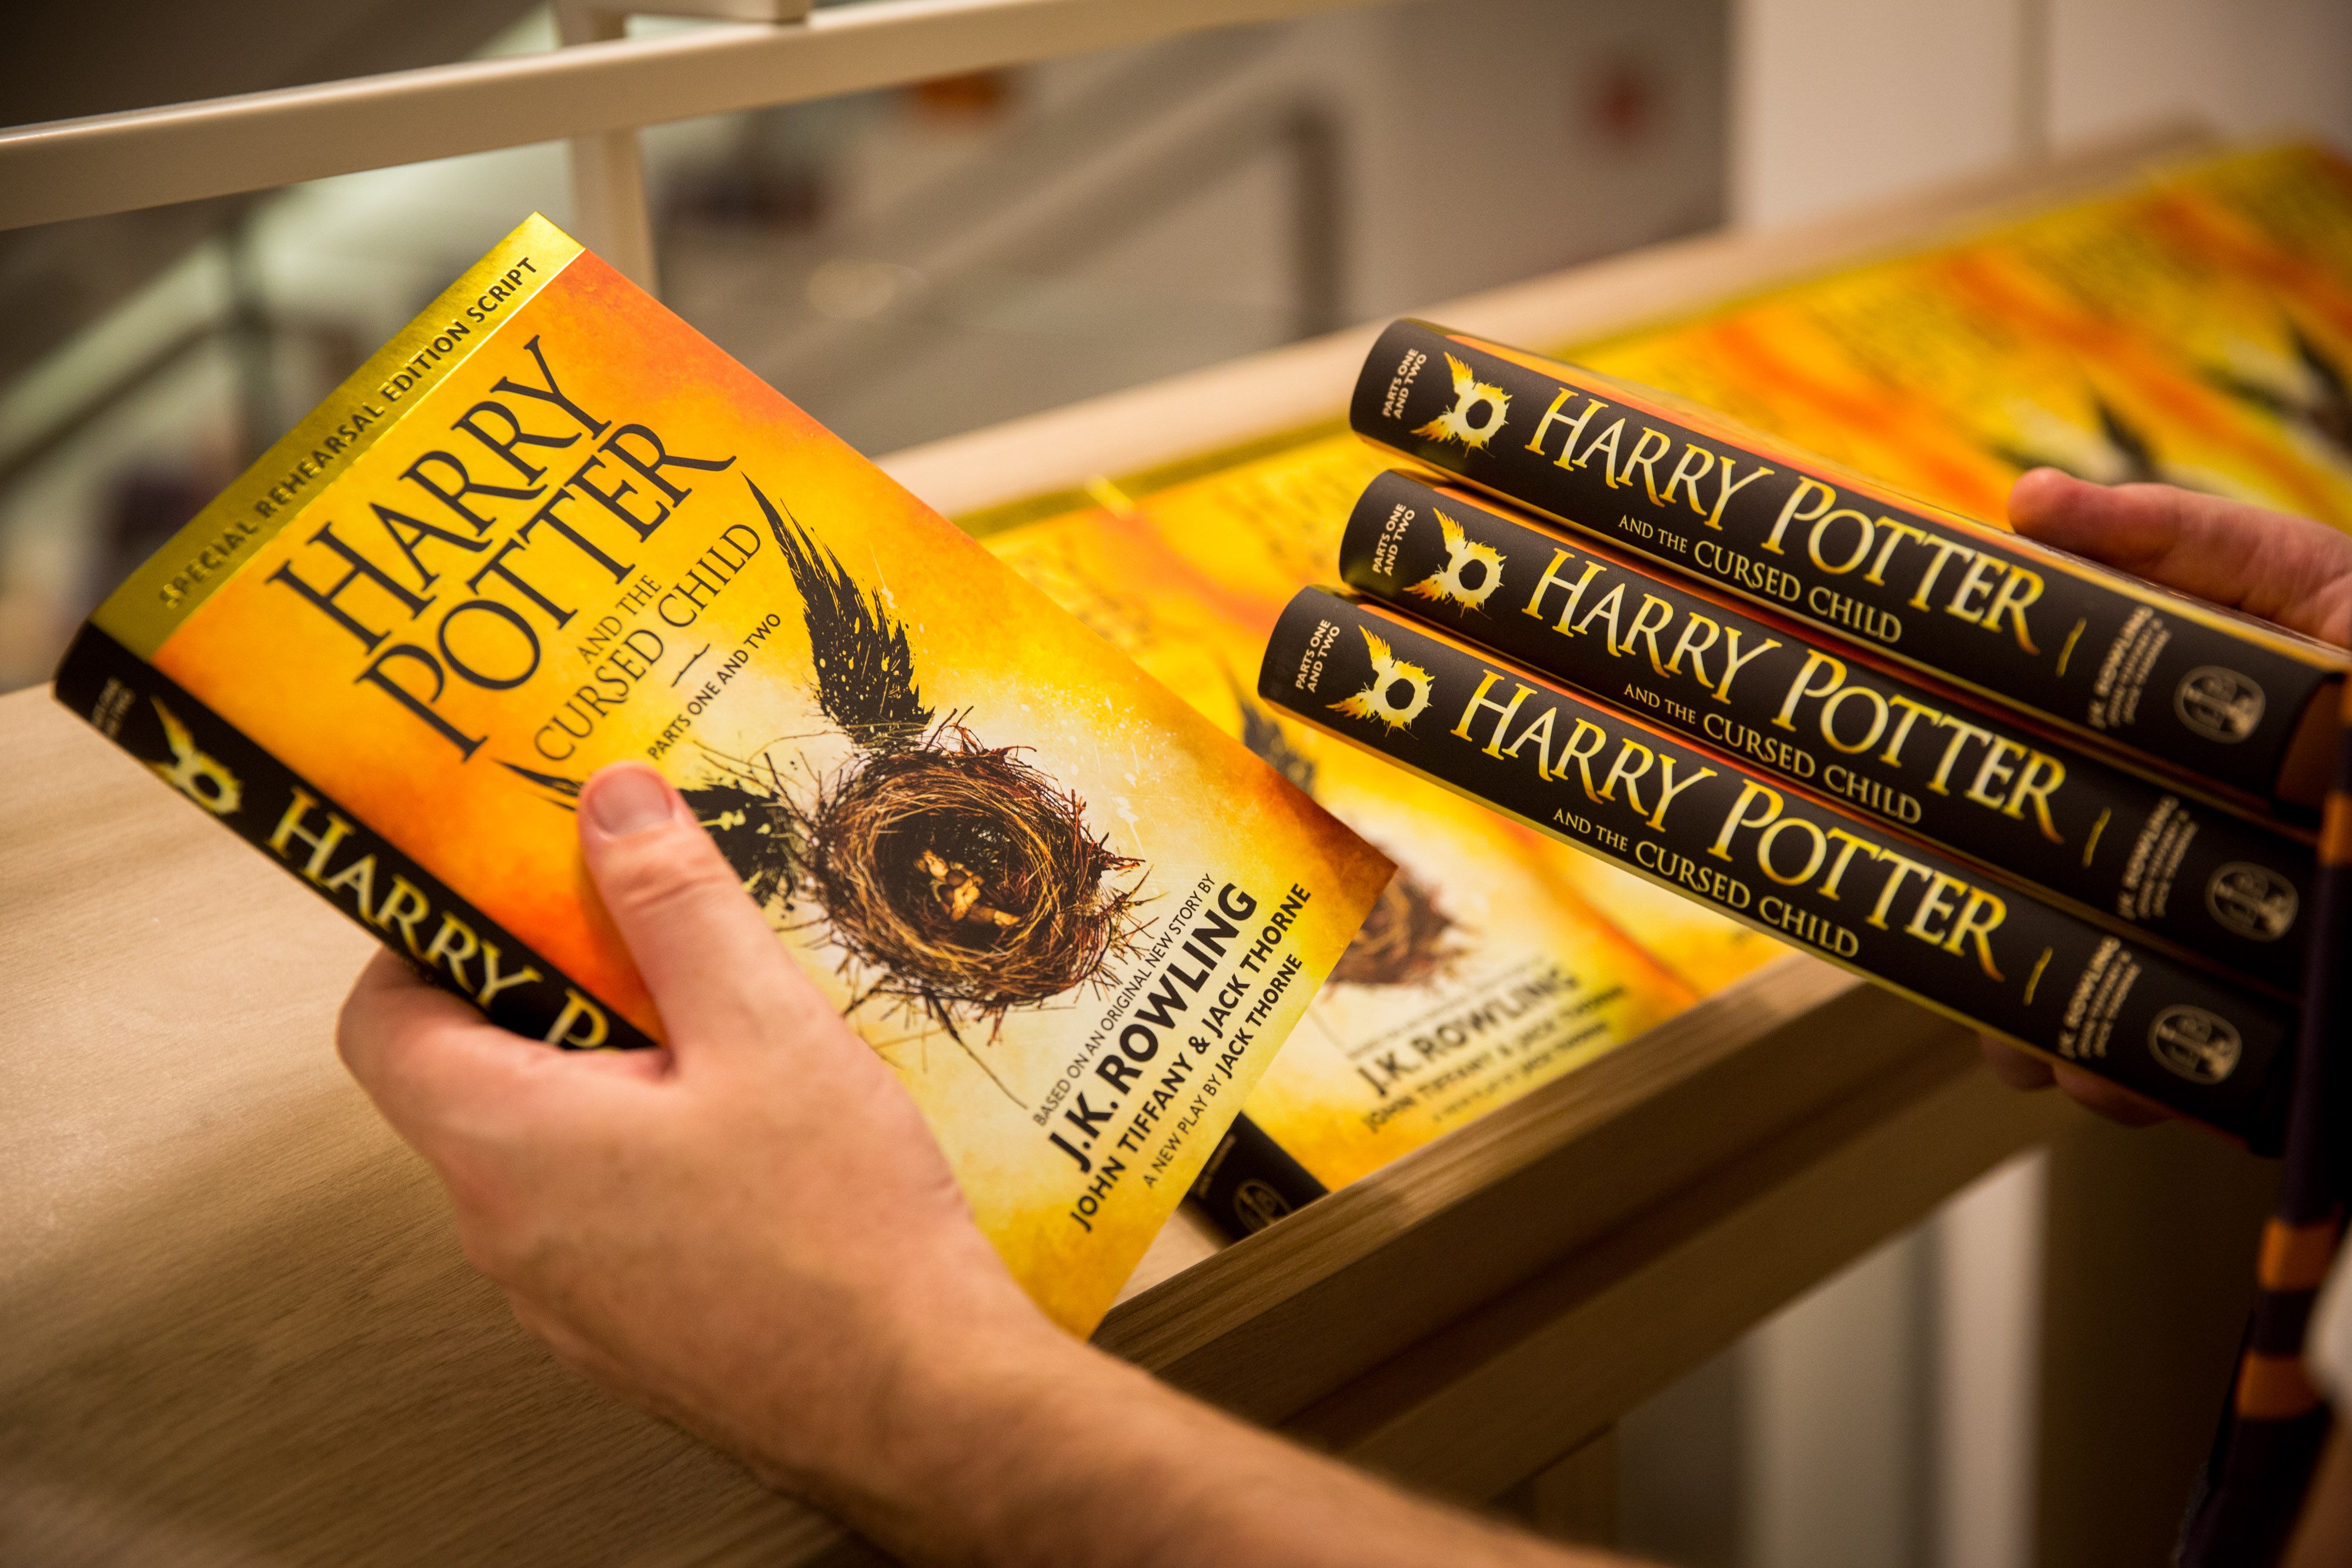 new harry potter and the cursed child book